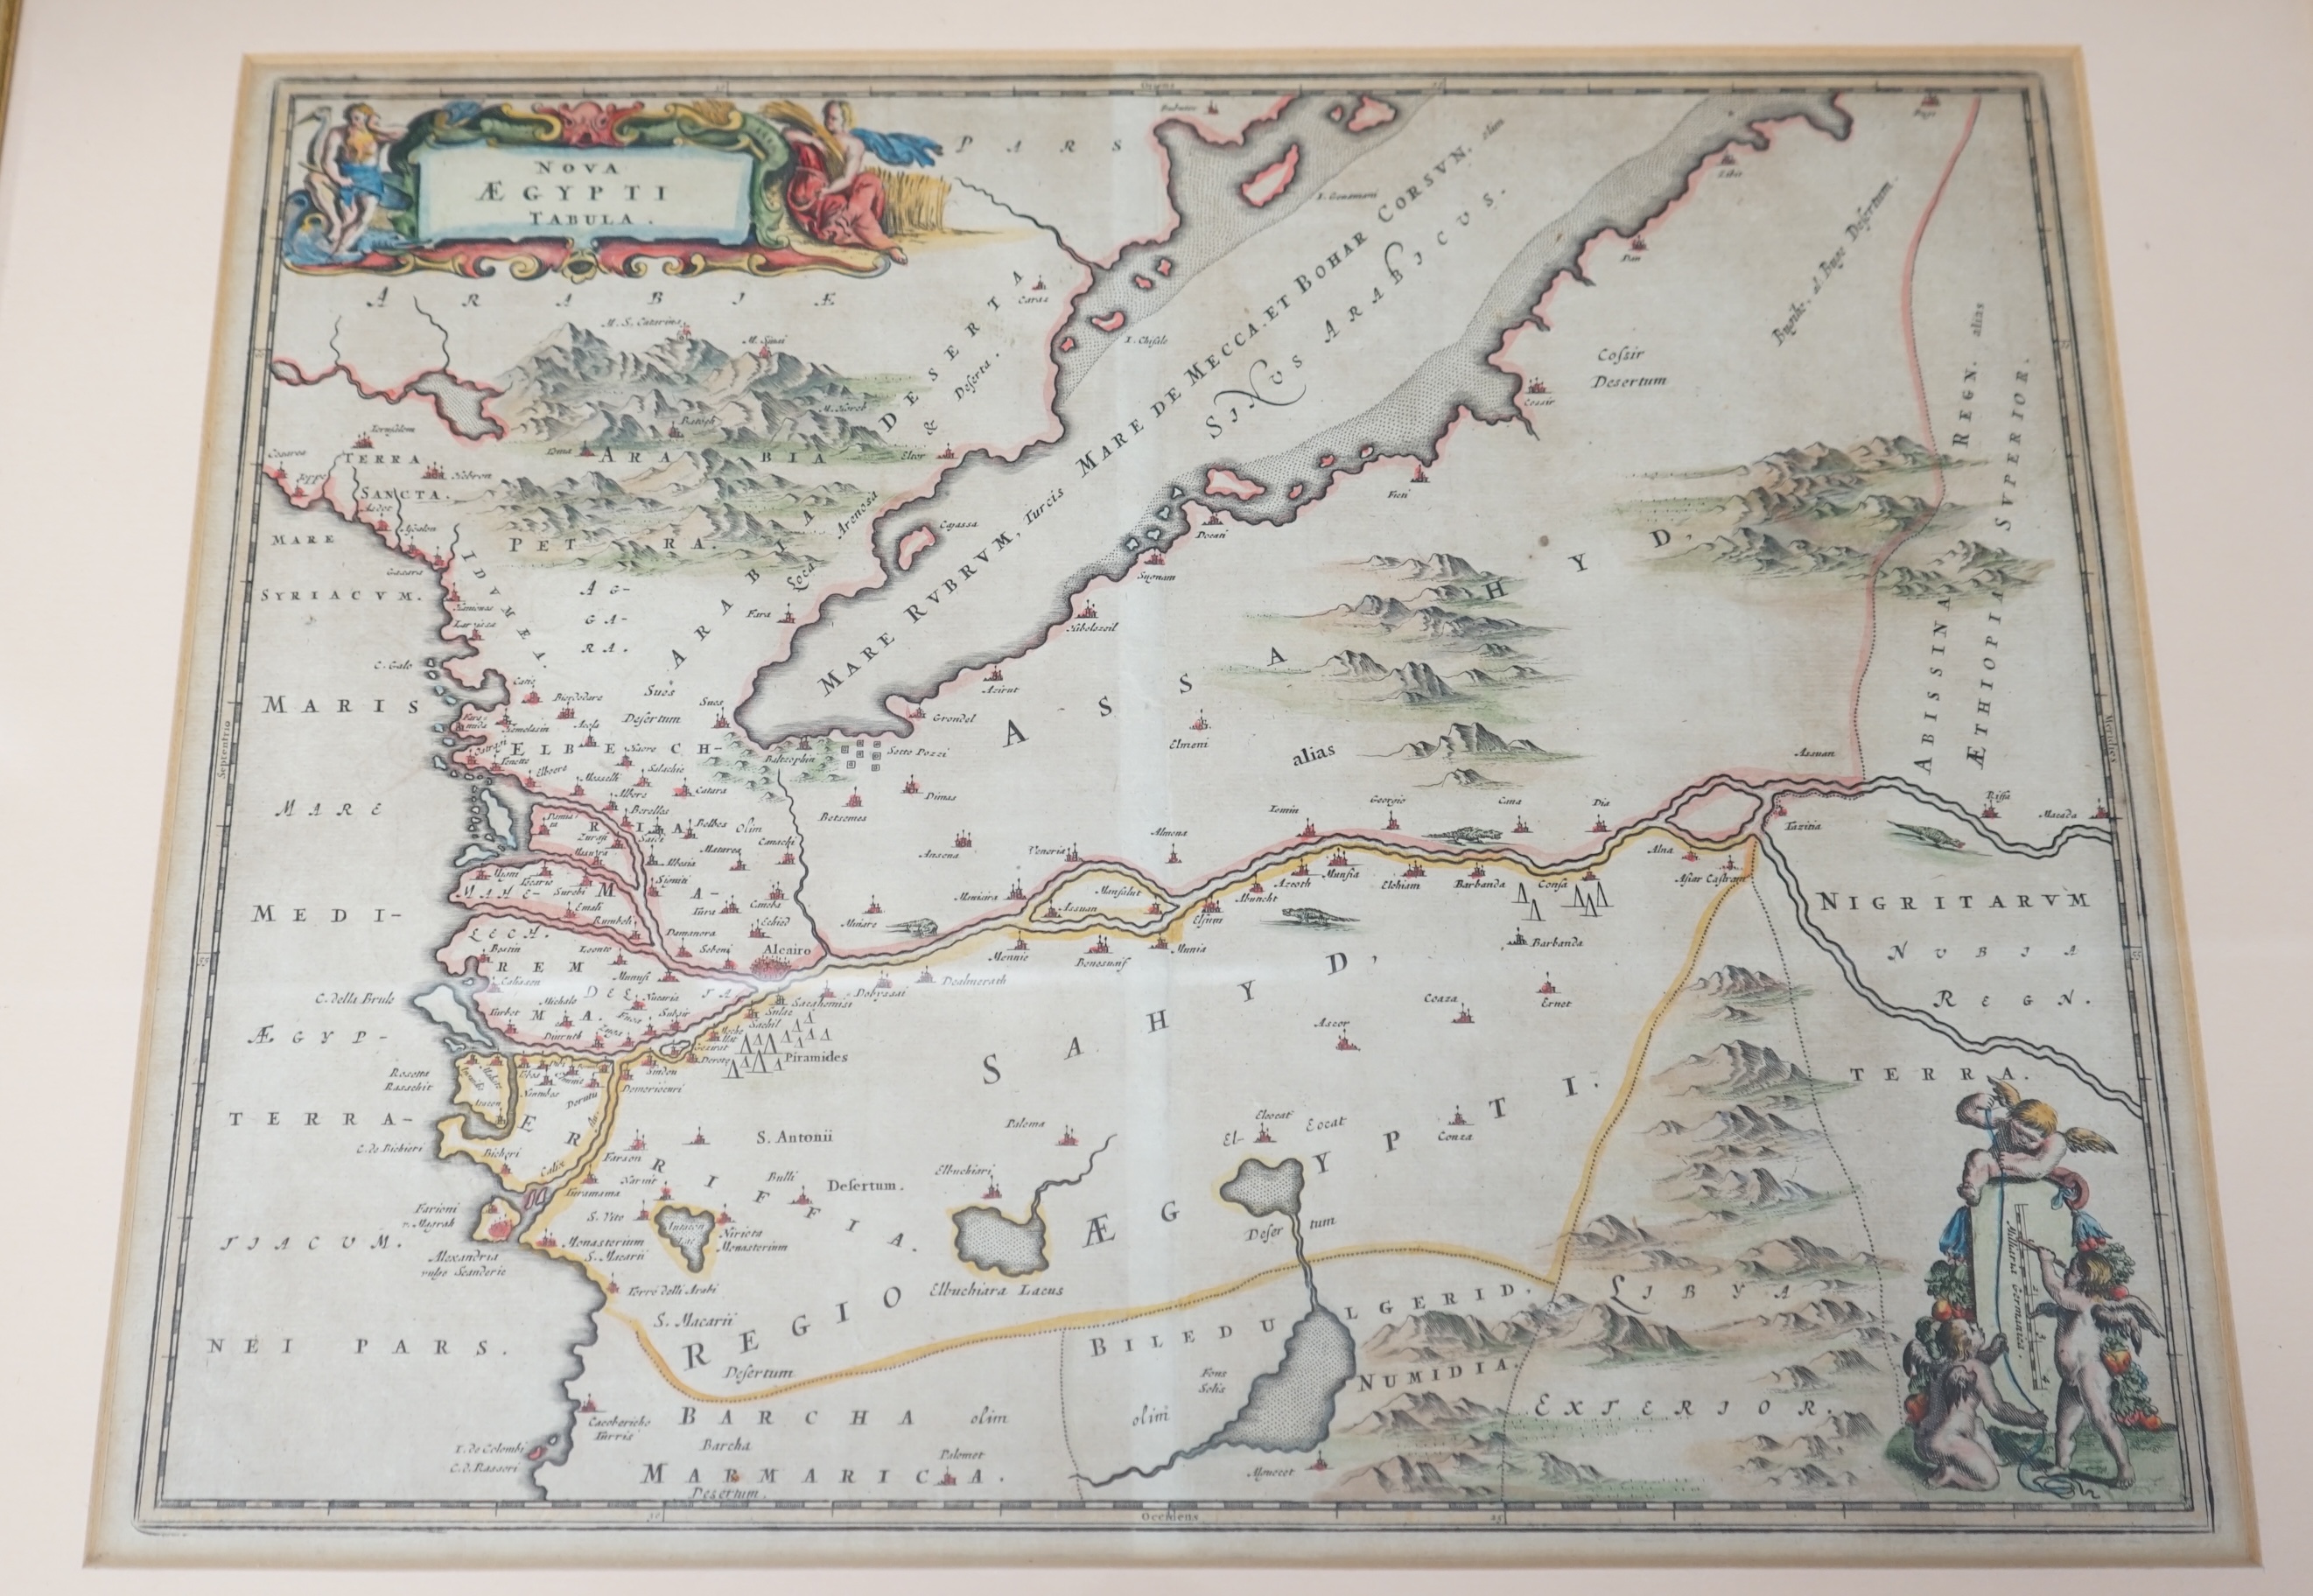 A hand coloured engraved map of Egypt (Nova Aegypti Tabula), 29 x 37cm. Condition - poor to fair, discolouration and creasing to the paper